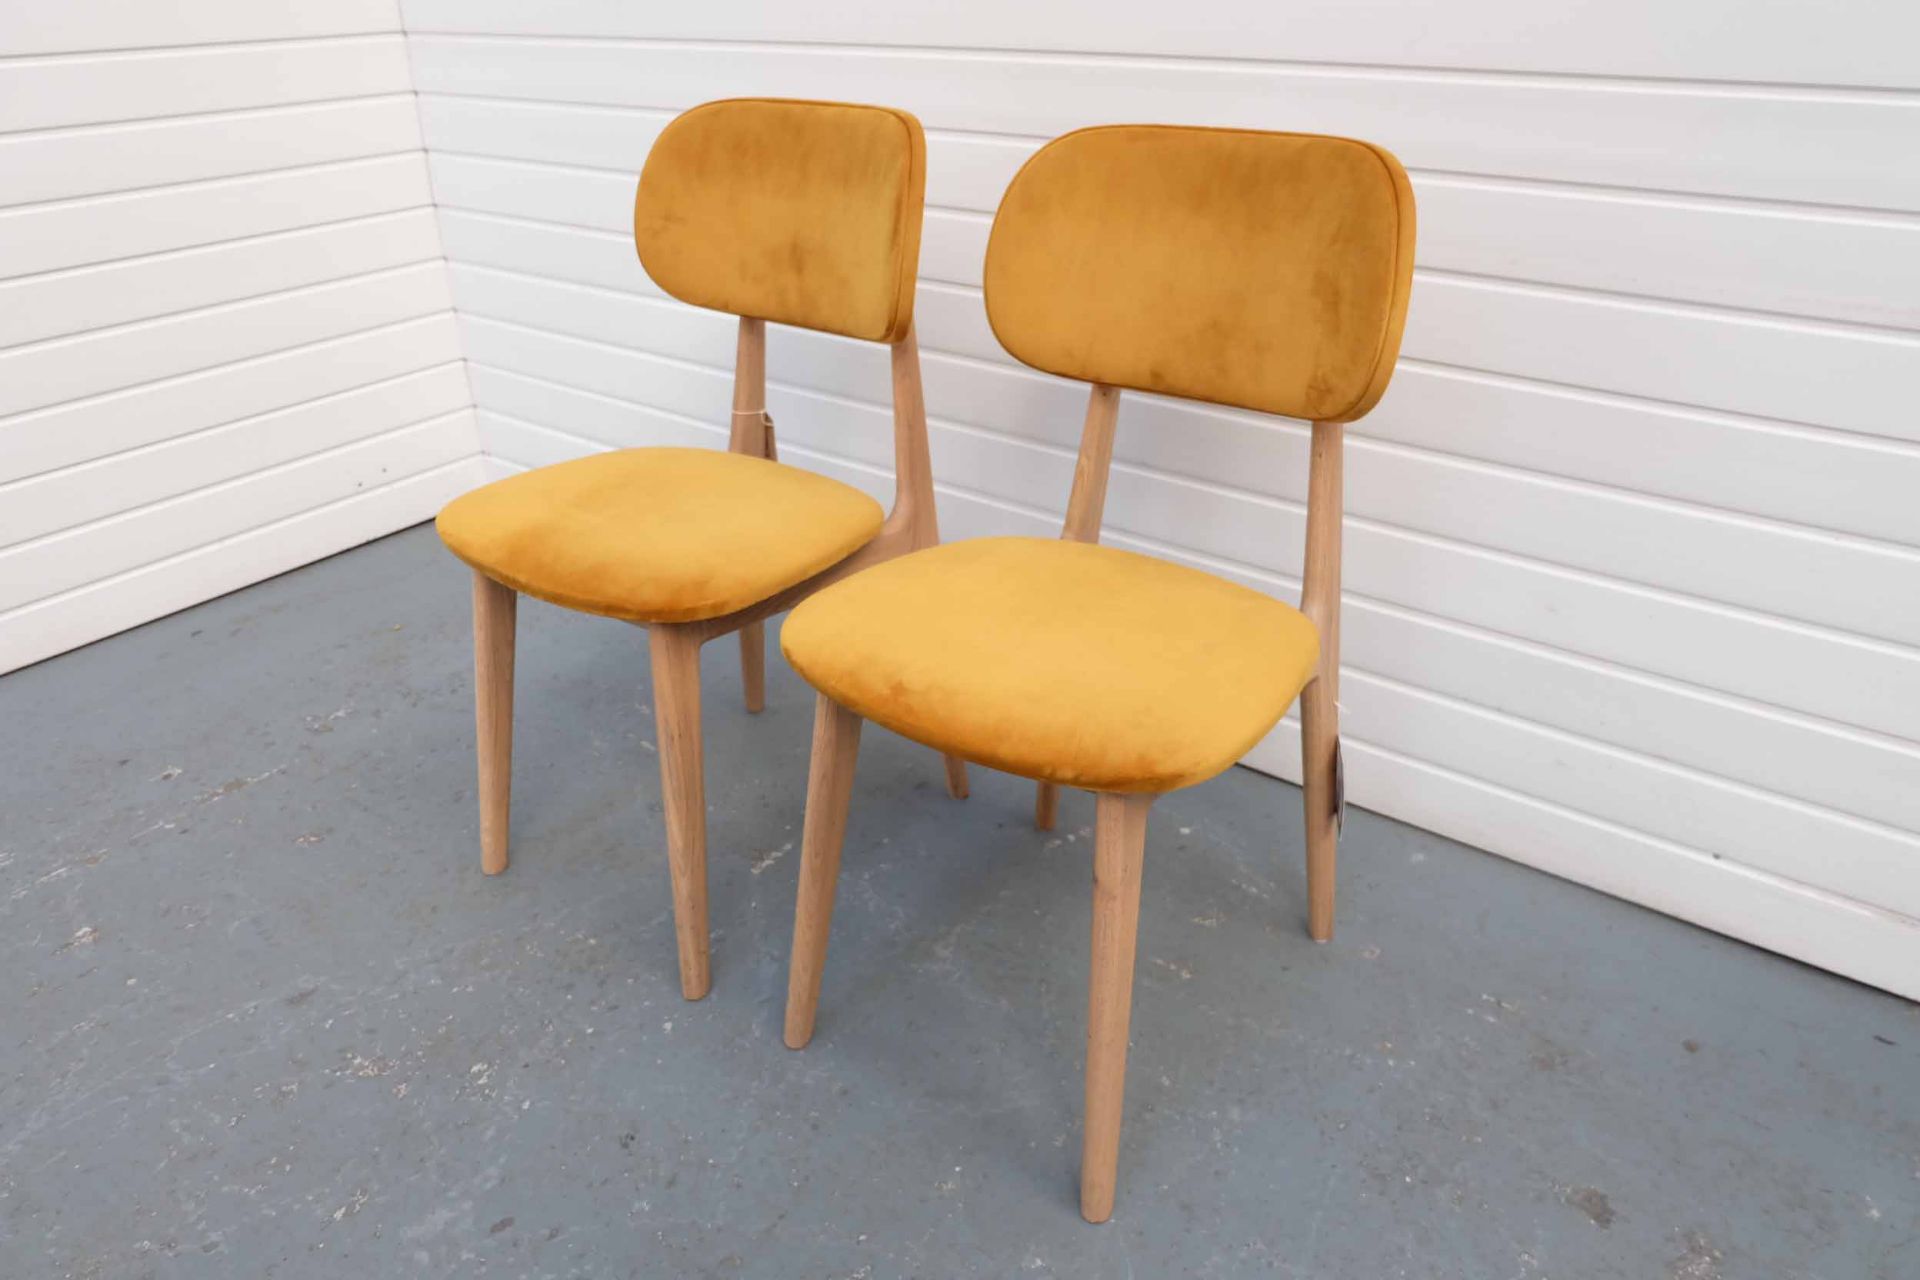 Pair of Carton Furniture 'Bari' Dining Chairs. Upholstered Seat and Back in Mustard Velvet. - Image 3 of 6